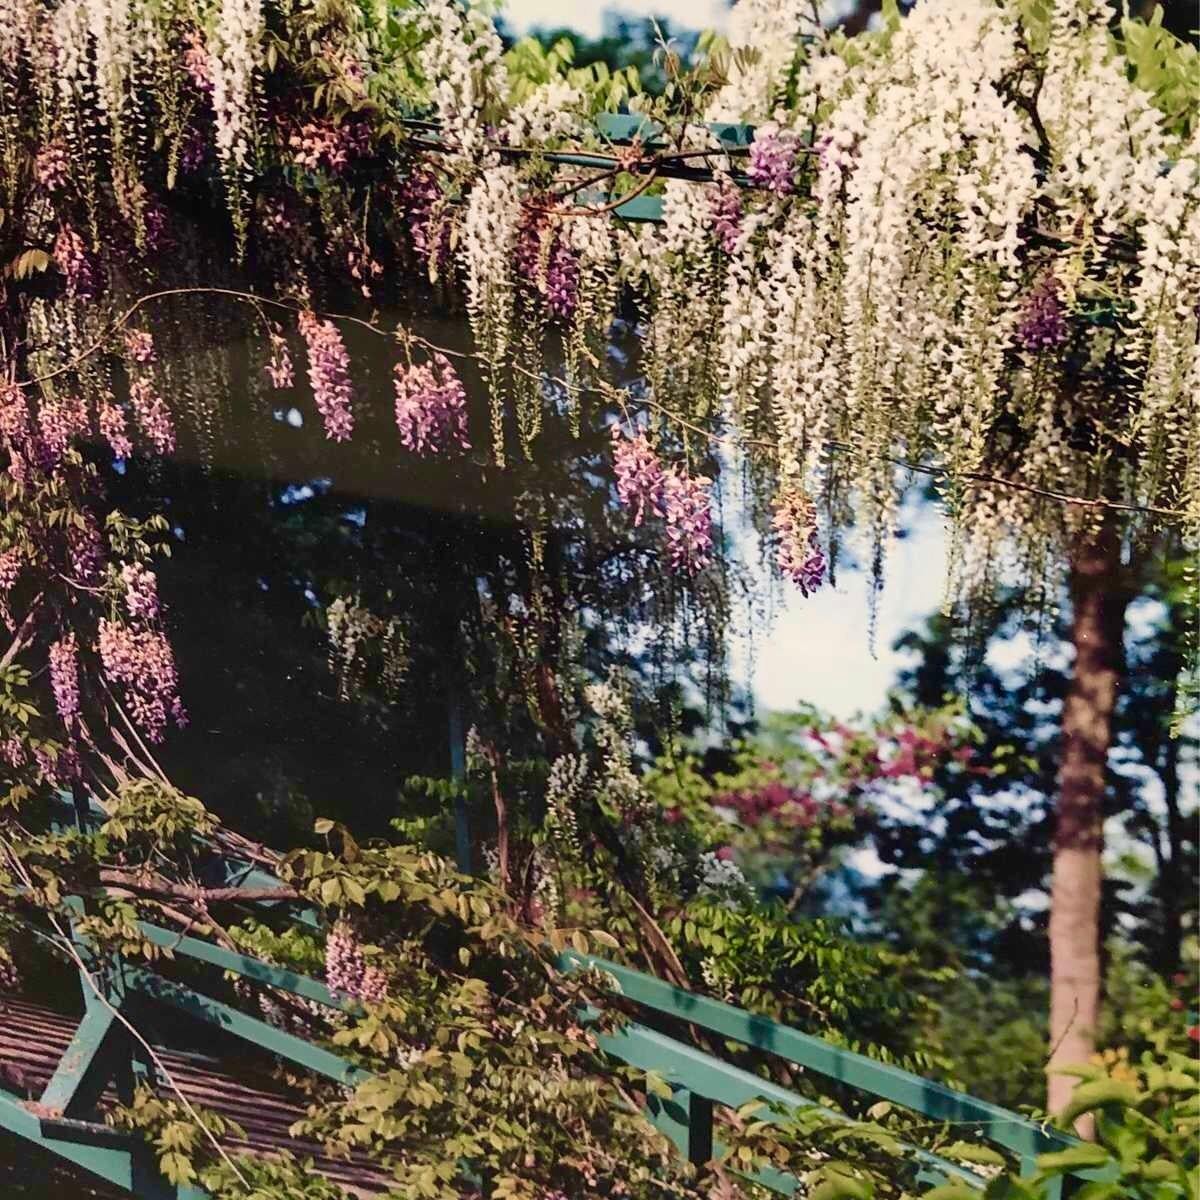 Color Photo Monet's Gardens, Giverny, Japanese Bridge Waterlillies Stephen Shore

Stephen Shore, Monet's Gardens, Giverny, Japanese Bridge over Waterlillies 1983, Color landscape photograph, Dye Transfer Photograph, Signed in Ink, from original